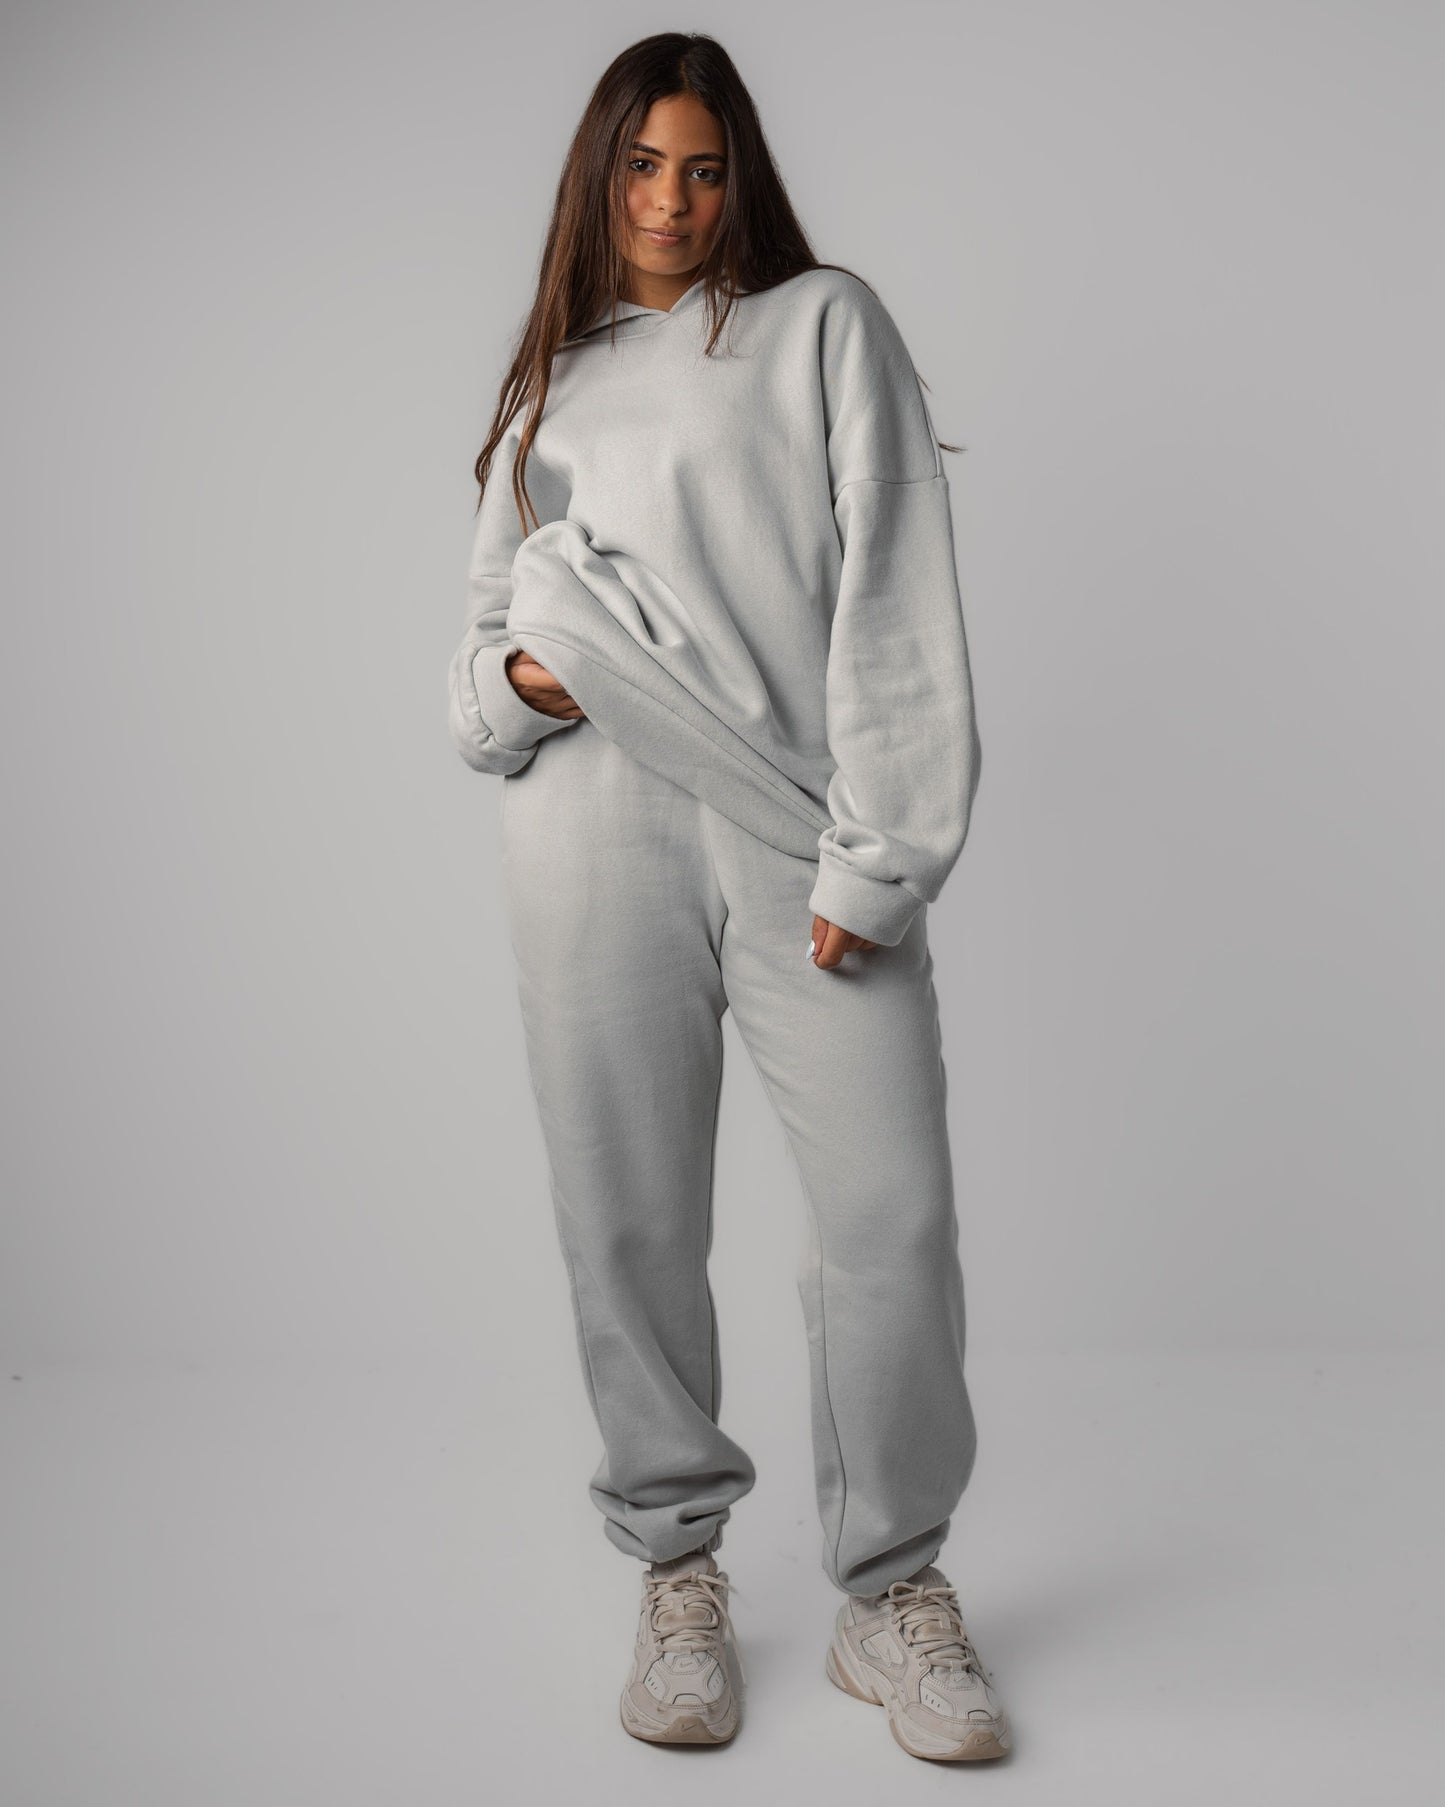 Matching set of gray Hoodie and Cuffed Jogger frontview